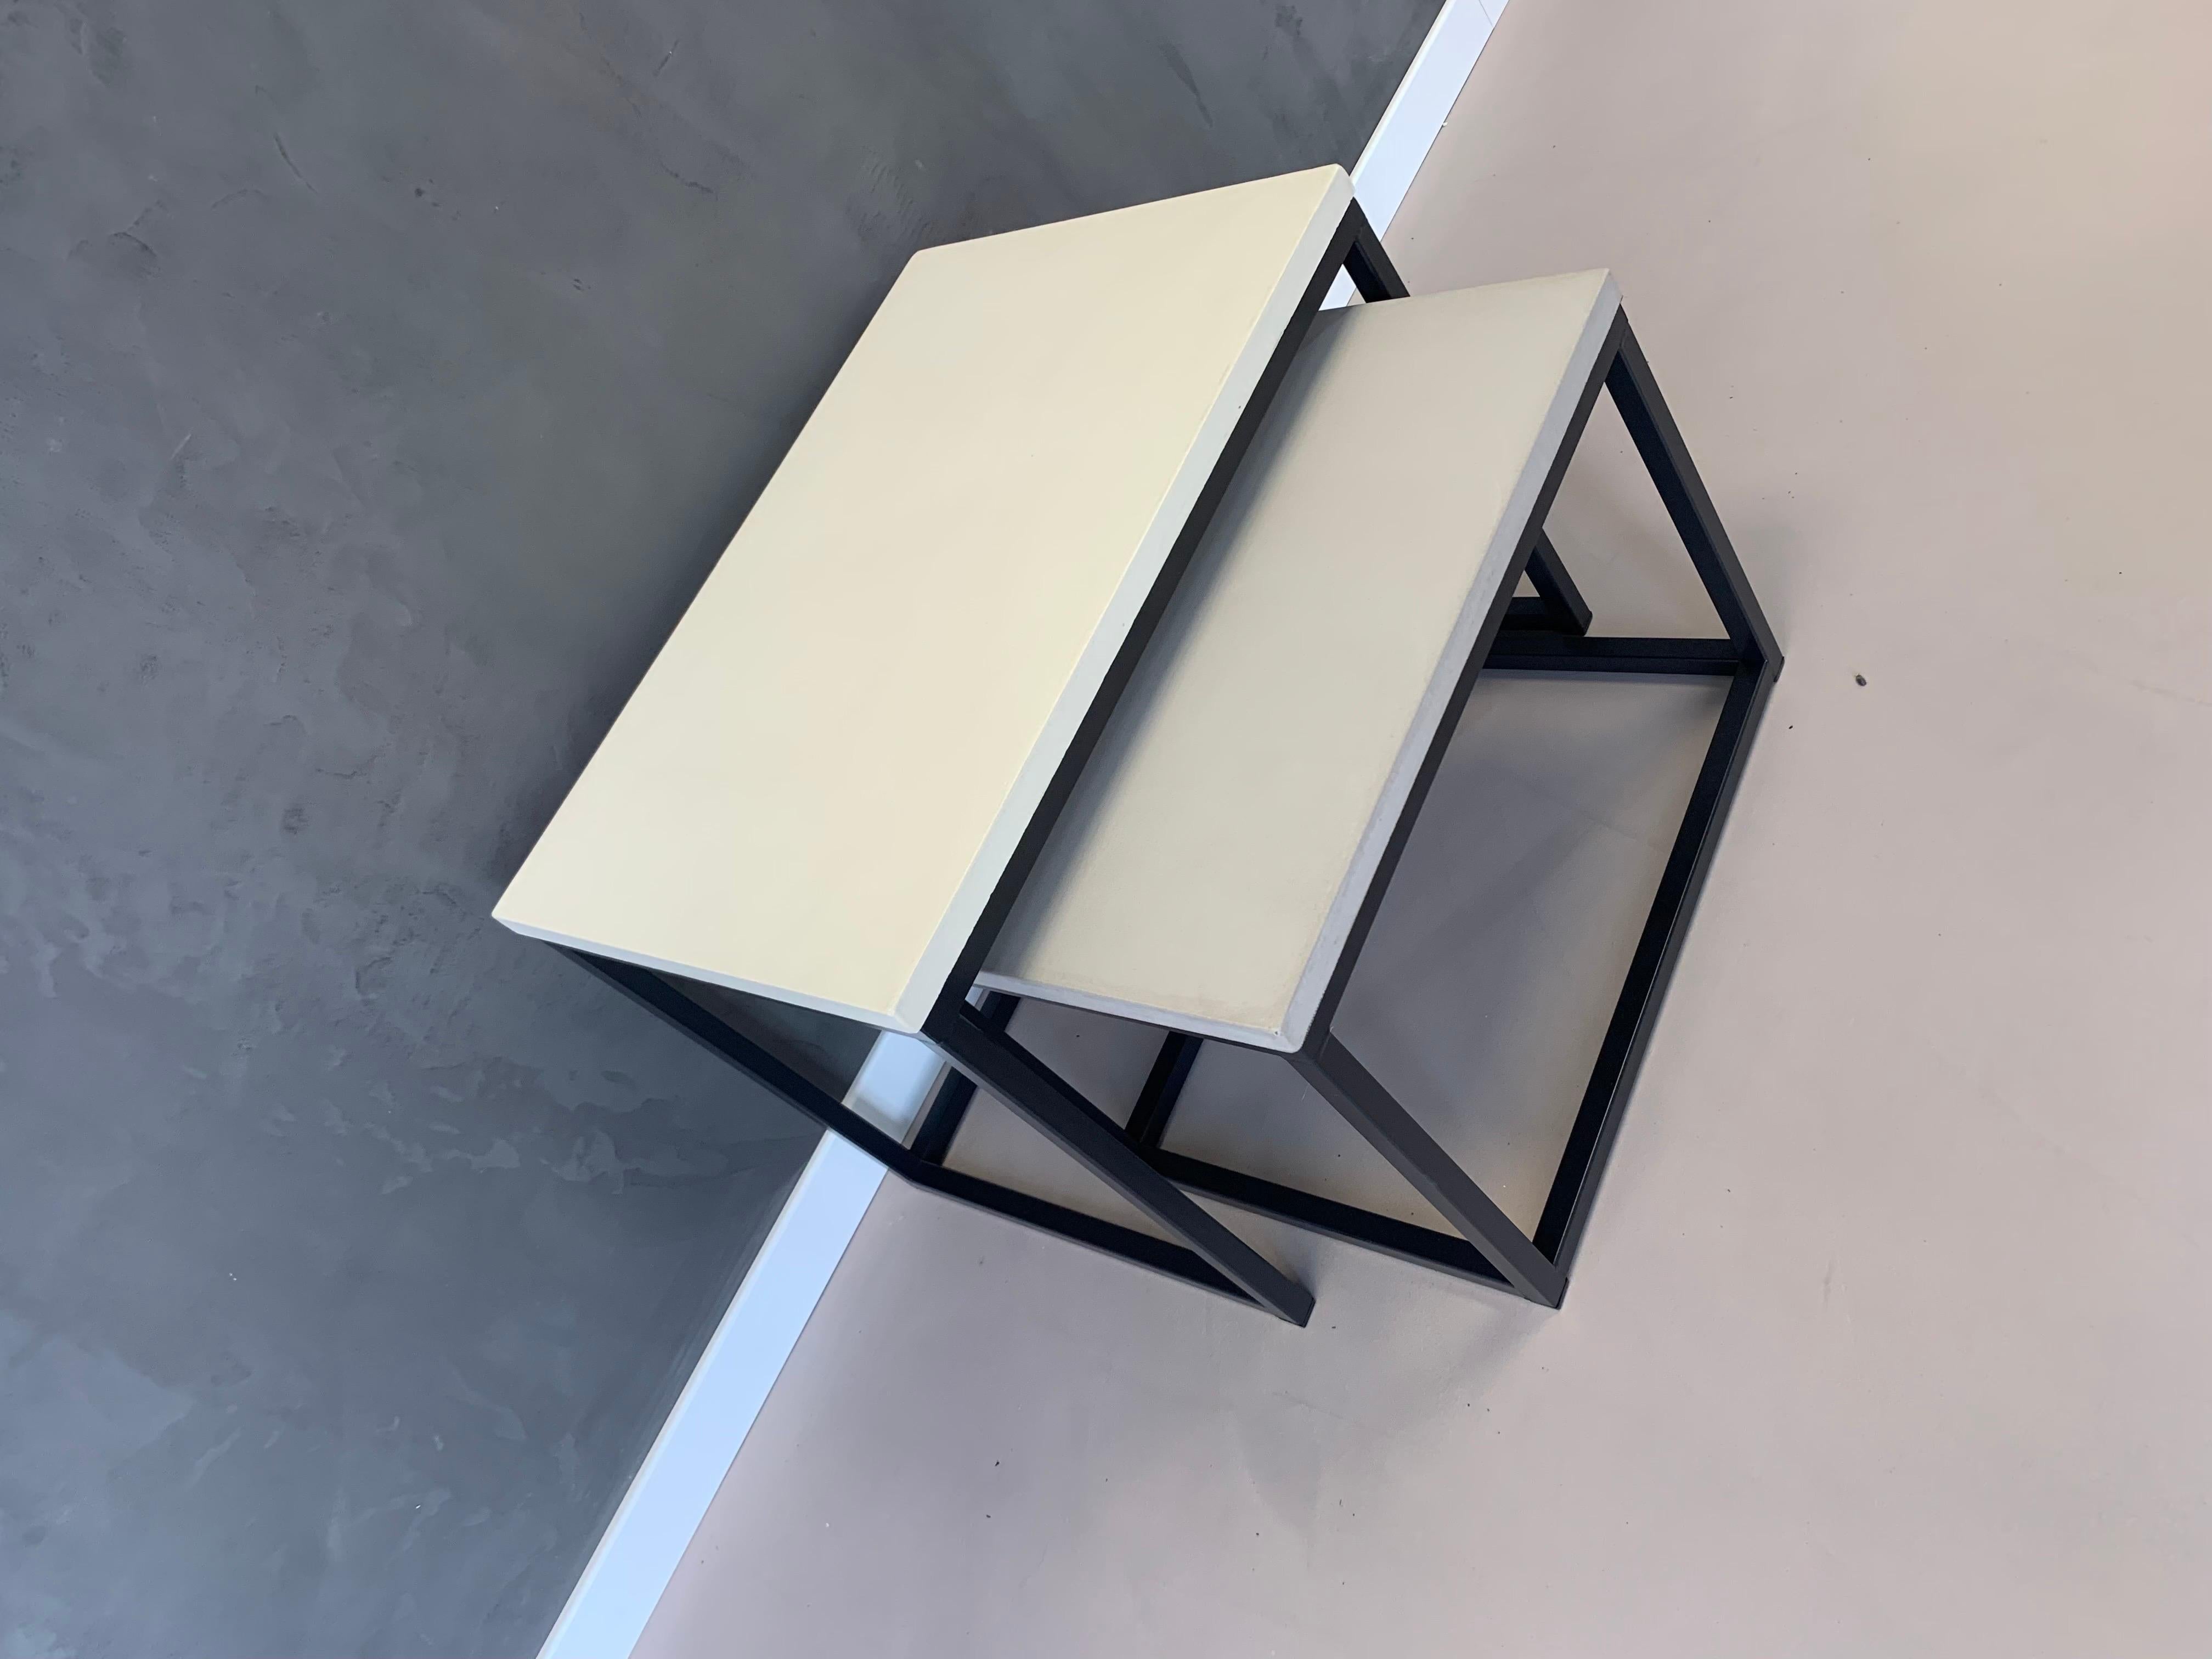 The beauty and high quality of handmade concrete and metal tables made in France are unparalleled in the world of furniture. The blending of these two materials results in pieces that are not only durable and functional, but also visually stunning.